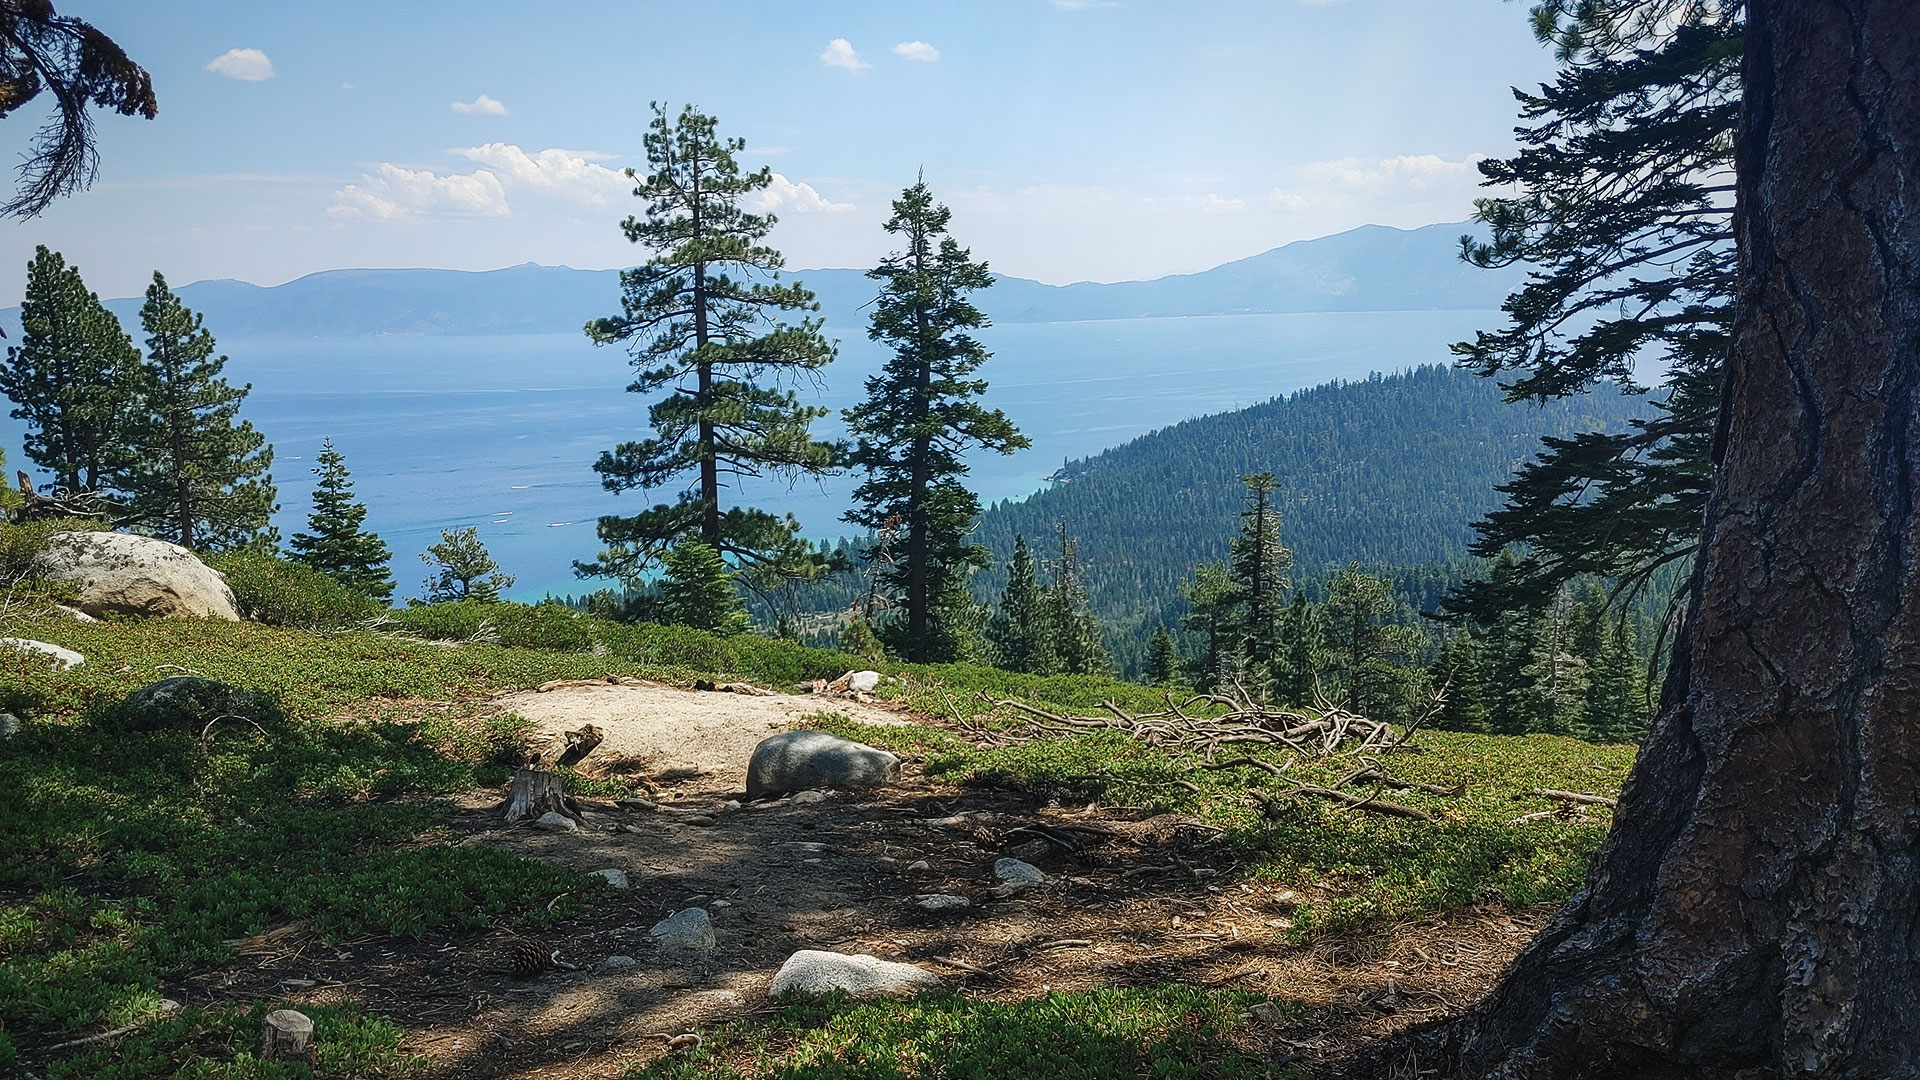 Lake Tahoe with trees and mountains